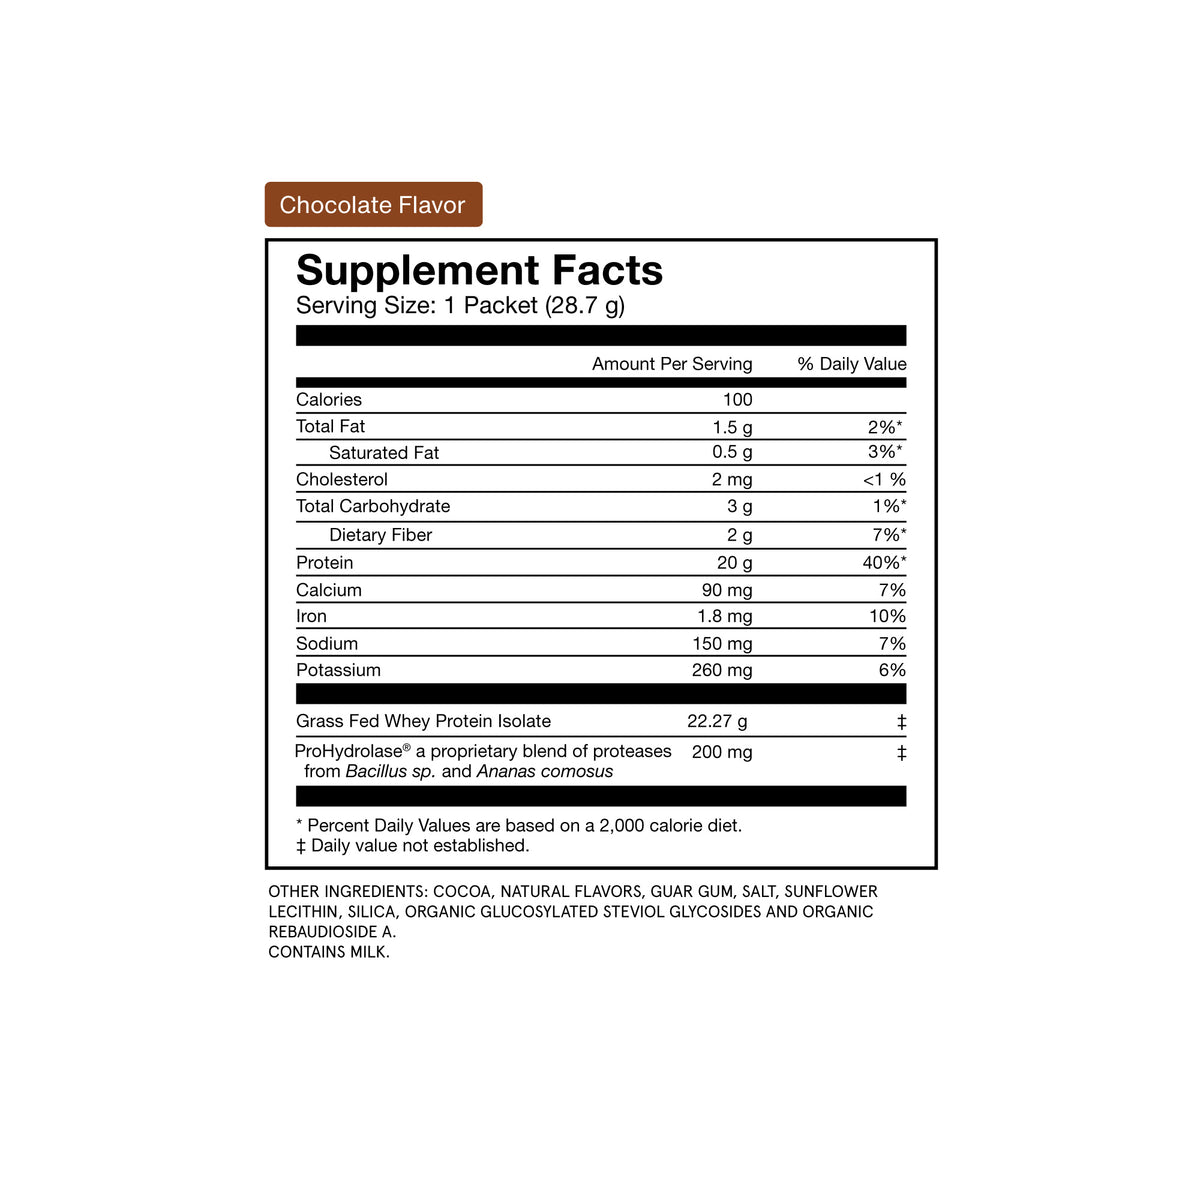 Chocolate Flavored Grass-Fed Whey Protein 14-Travel Packs Supplement Facts